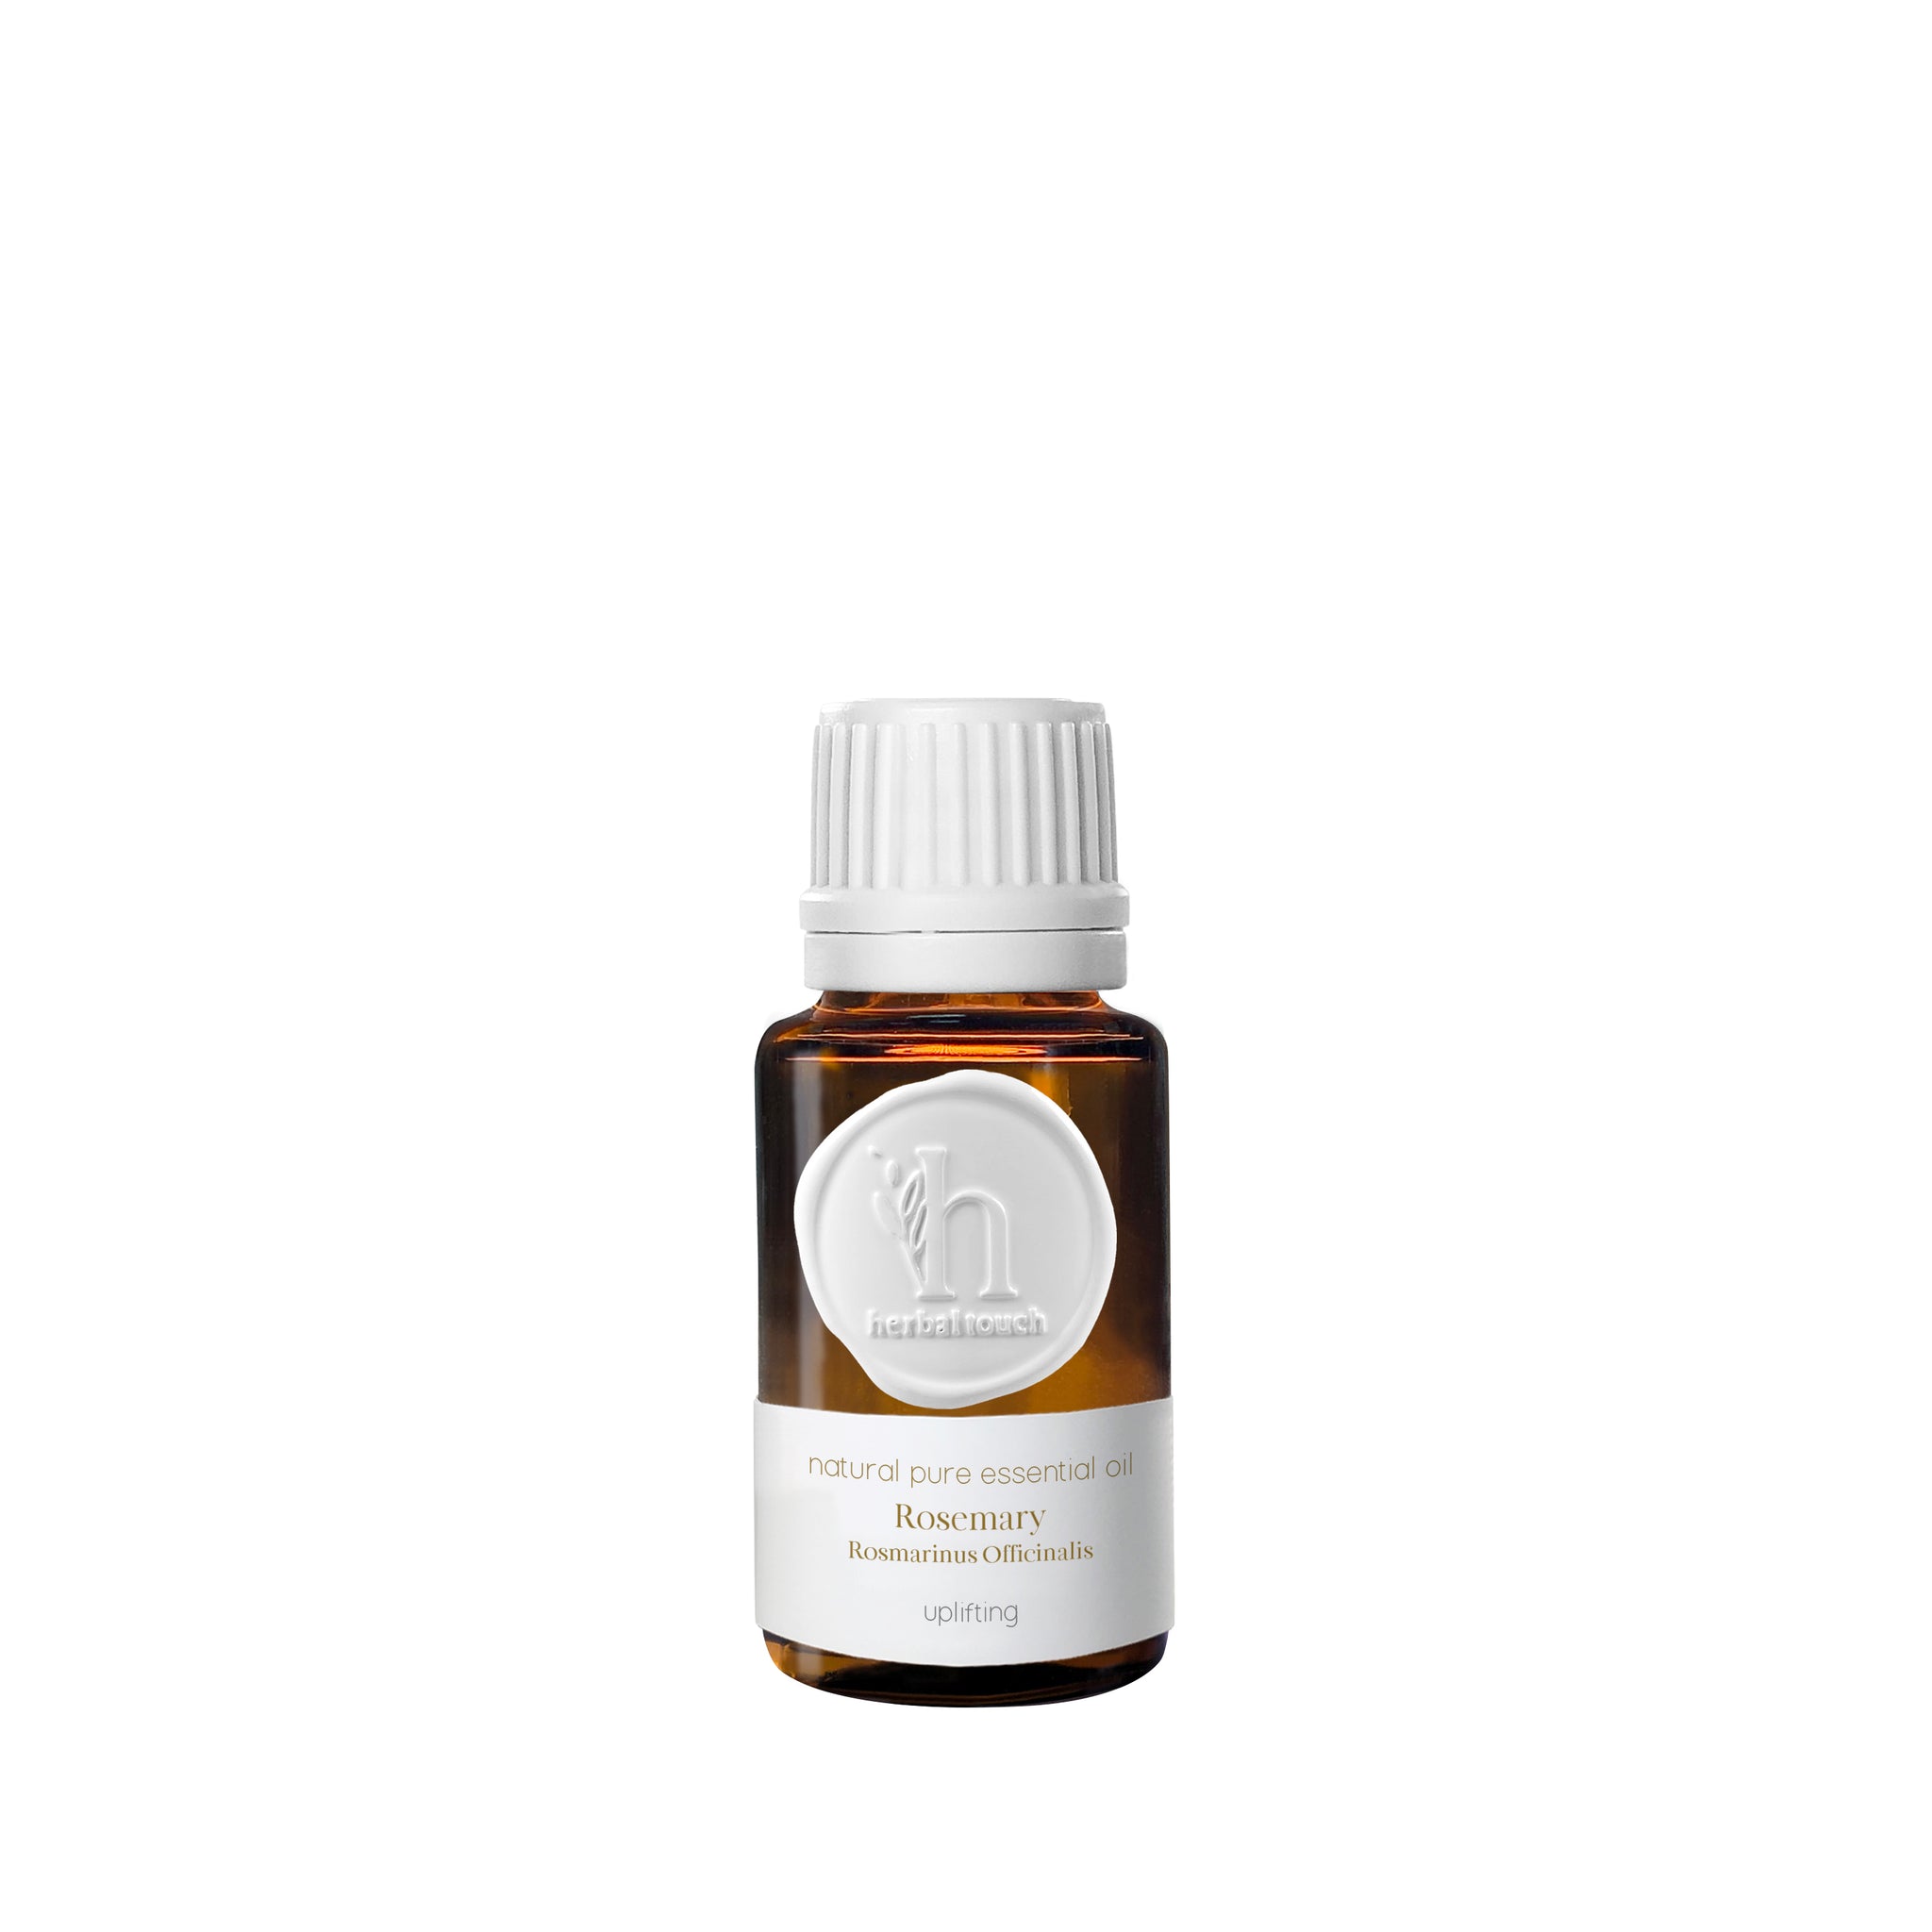 Rosemary Natural Pure Essential Oil 17ml